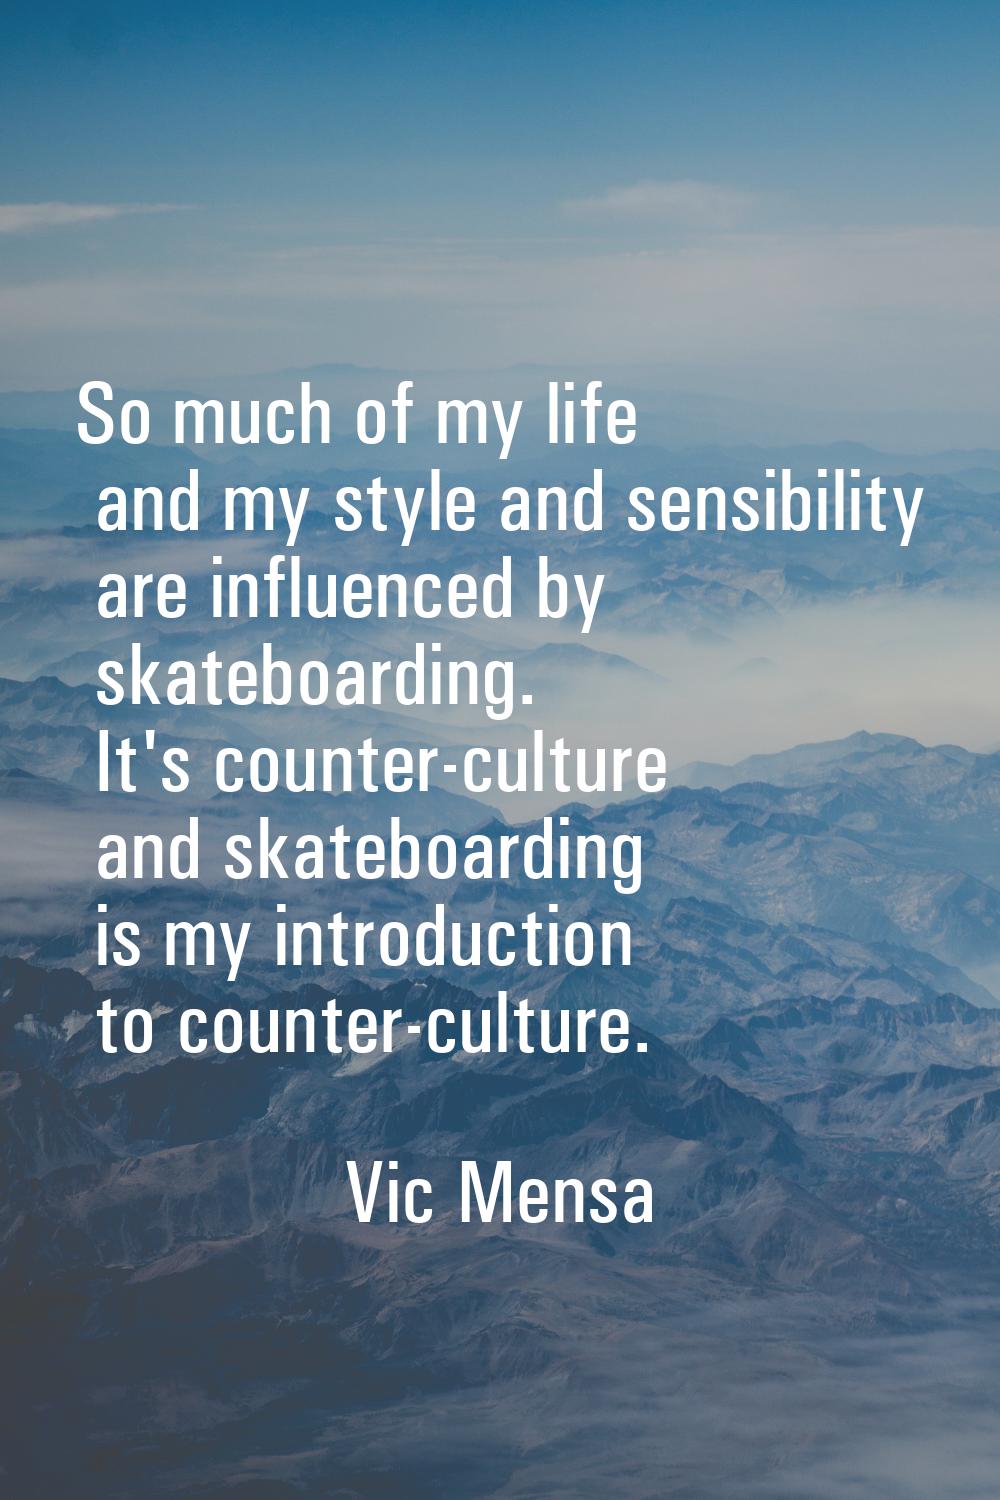 So much of my life and my style and sensibility are influenced by skateboarding. It's counter-cultu